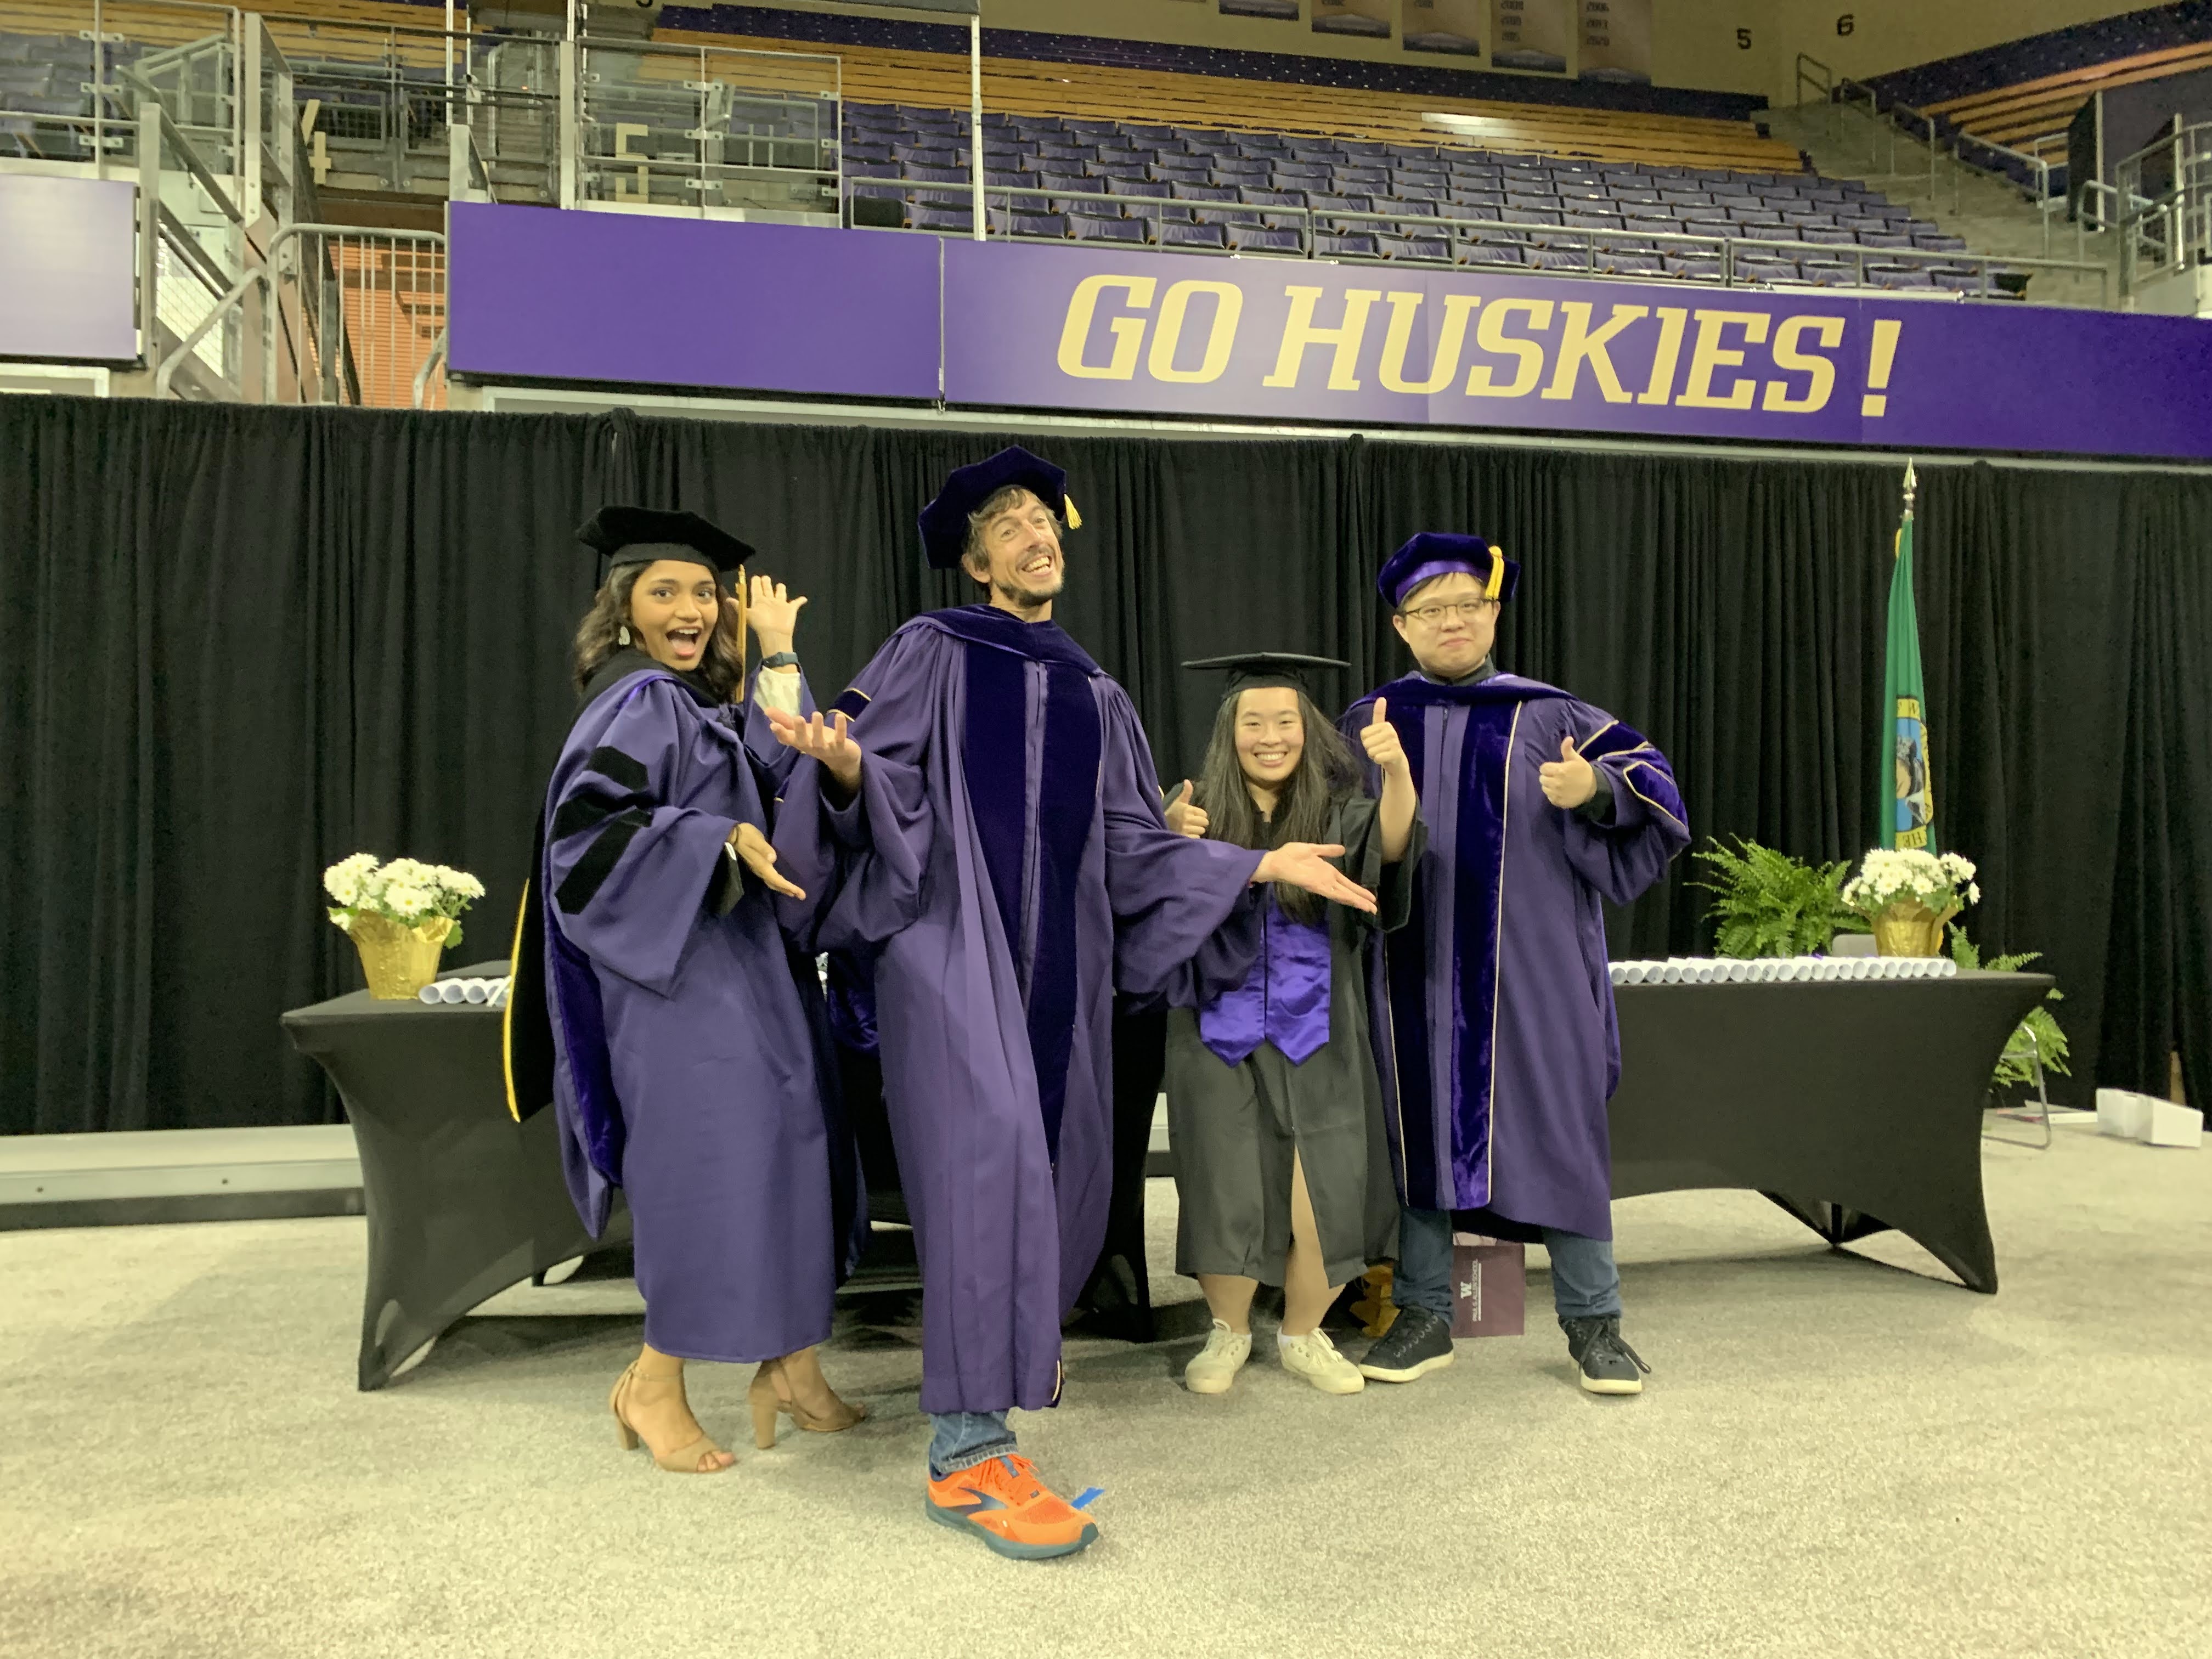 Manaswi, Jon, Aileen, and Liang standing in their graduation gowns with silly expressions